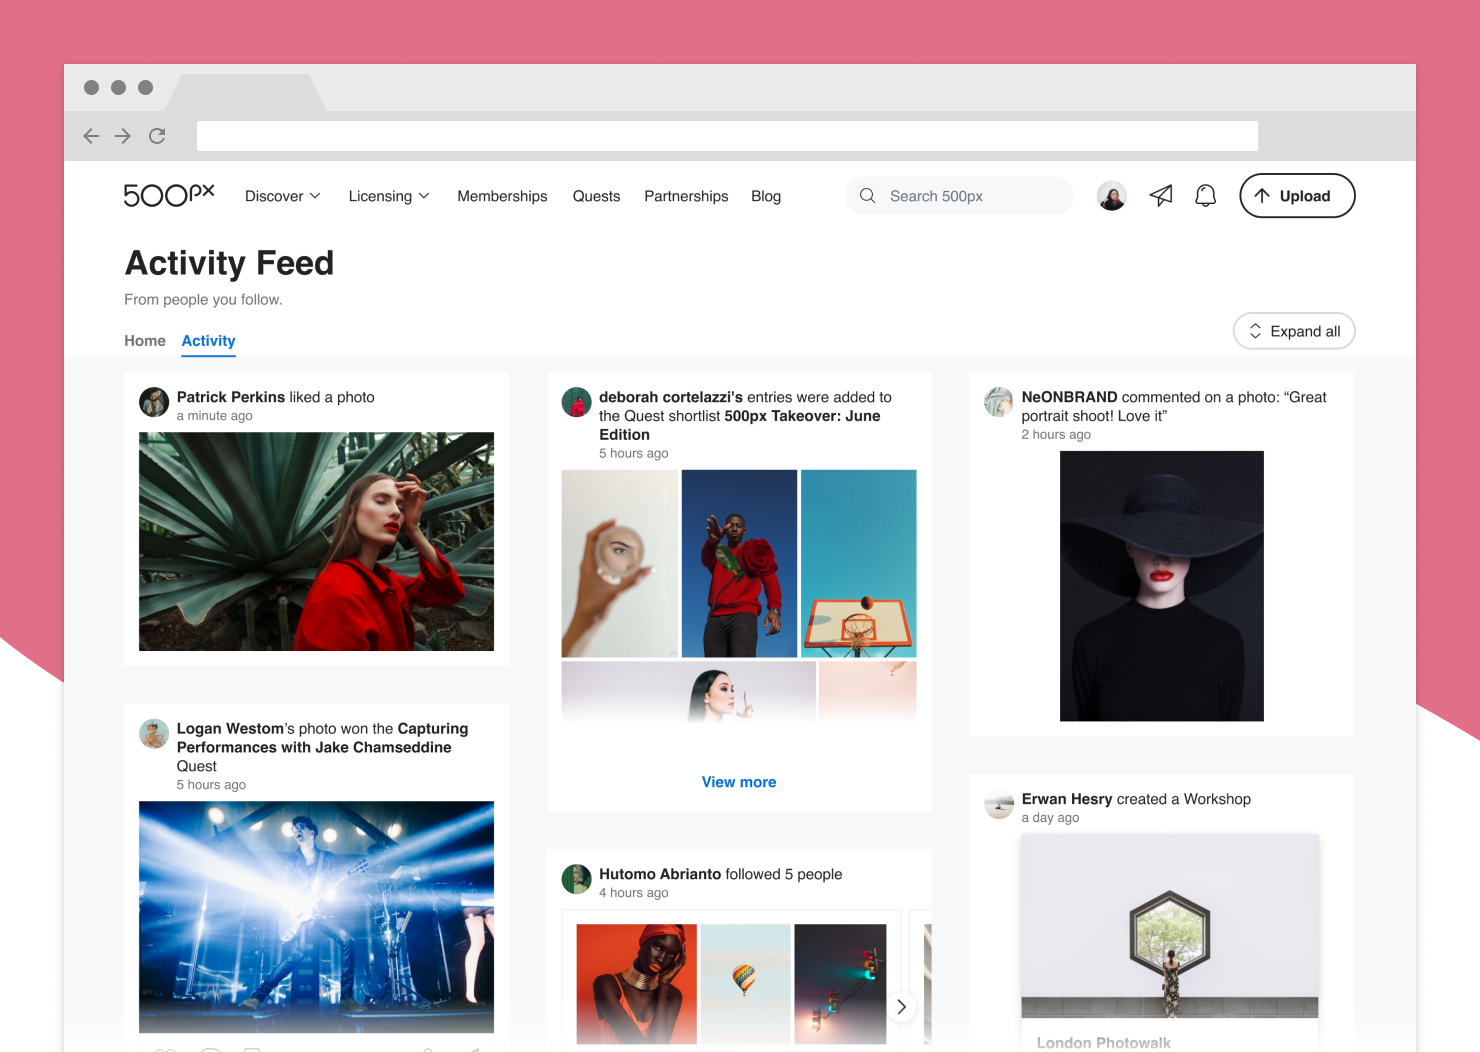 A view of recommended content in the new 500px Home Feed